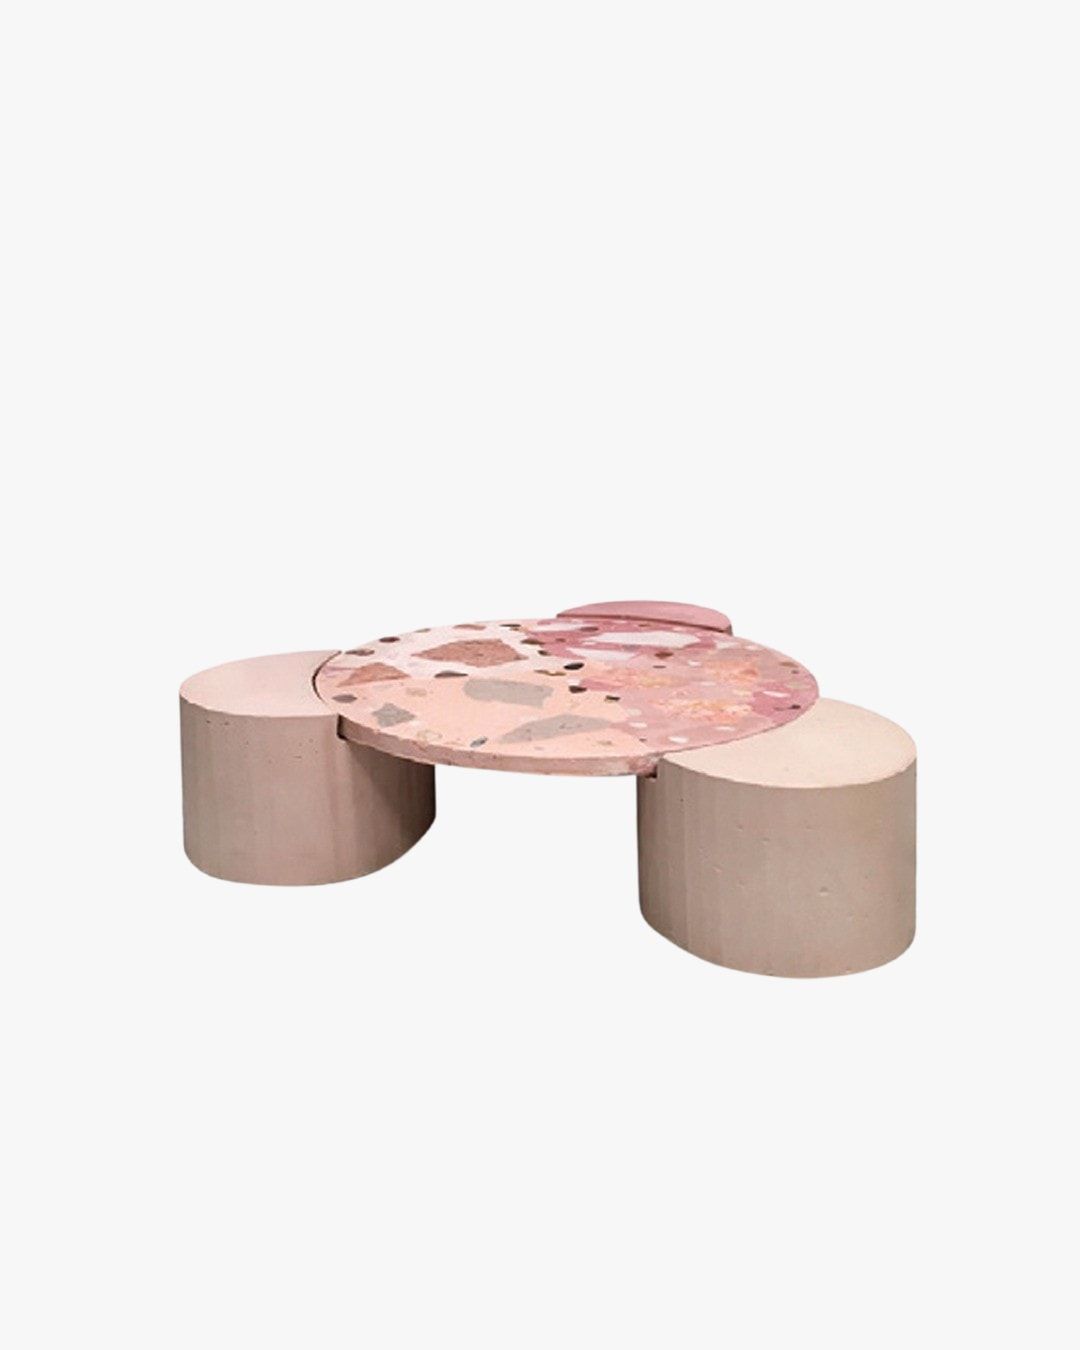 Concrete Terrazzo Coffee Table, Pink | Tosco Studio | Modern Metier Inside Modern Concrete Coffee Tables (View 12 of 20)